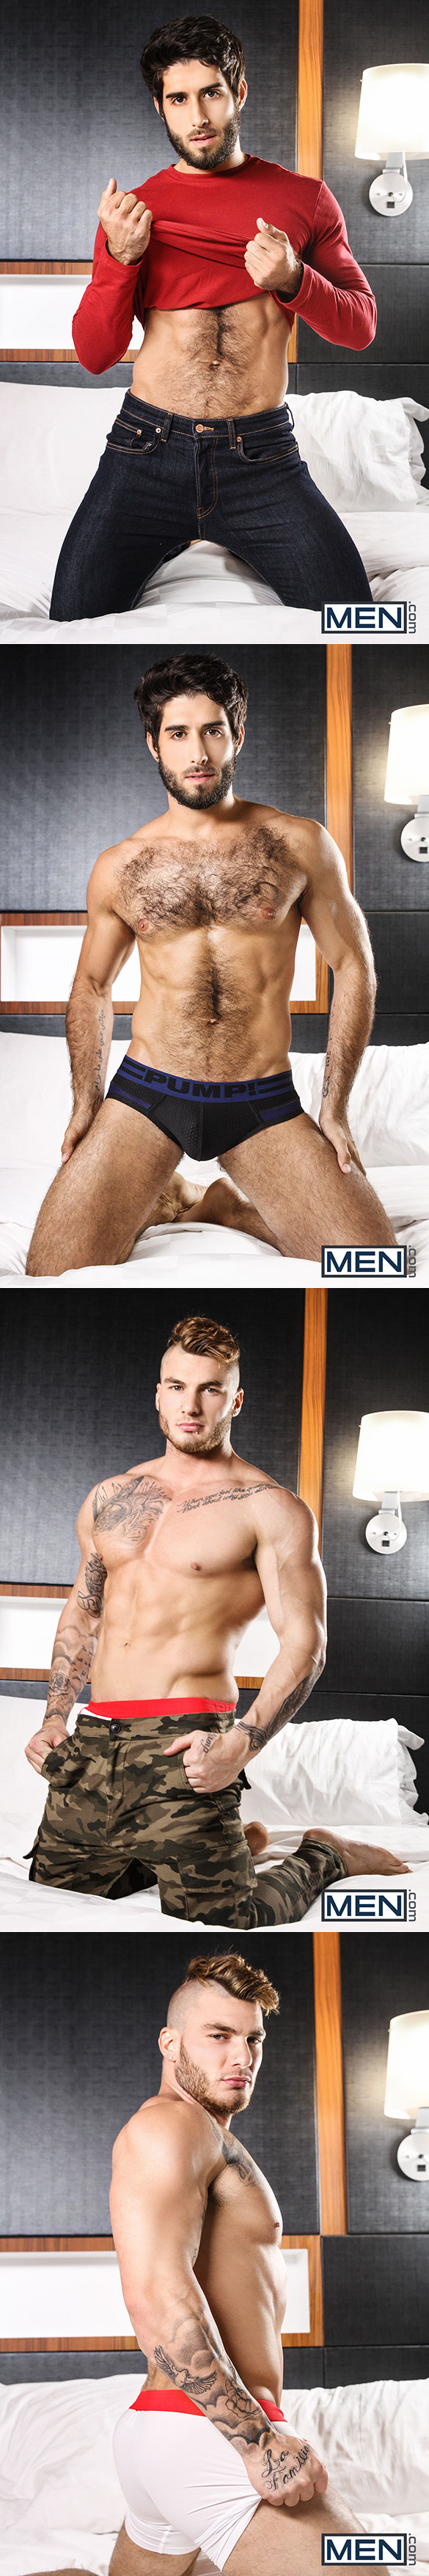 Men.com: William Seed bottoms for Diego Sans in "Cheaters, Part 1"